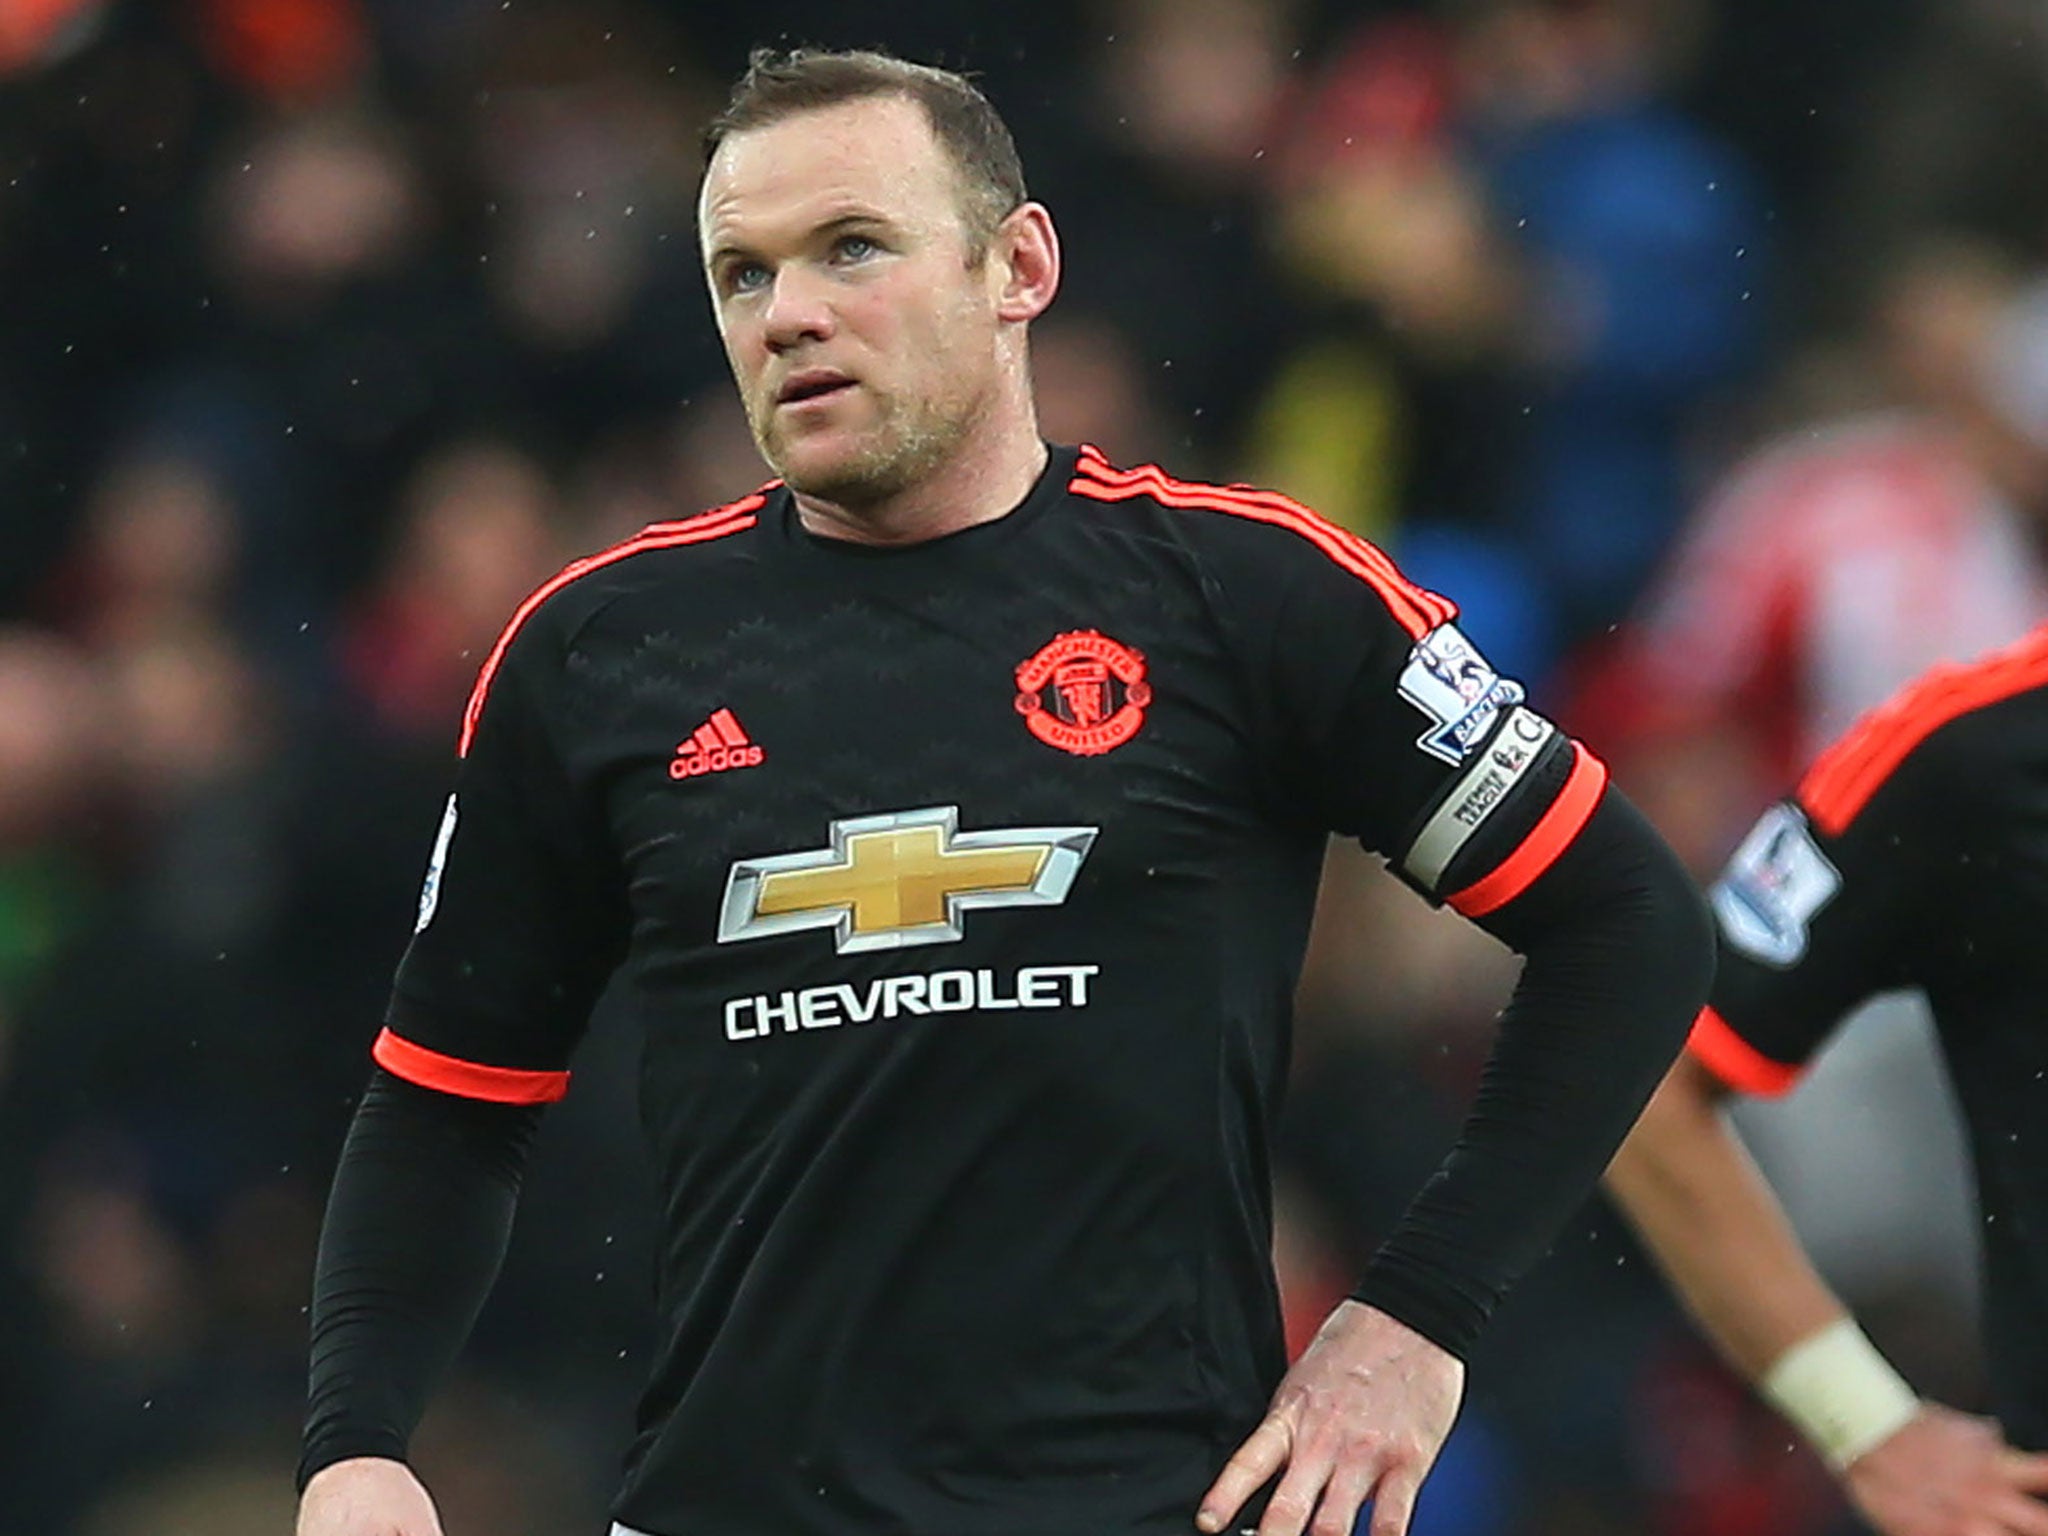 Wayne Rooney will miss Manchester United's Europa League clash with FC Midtjylland